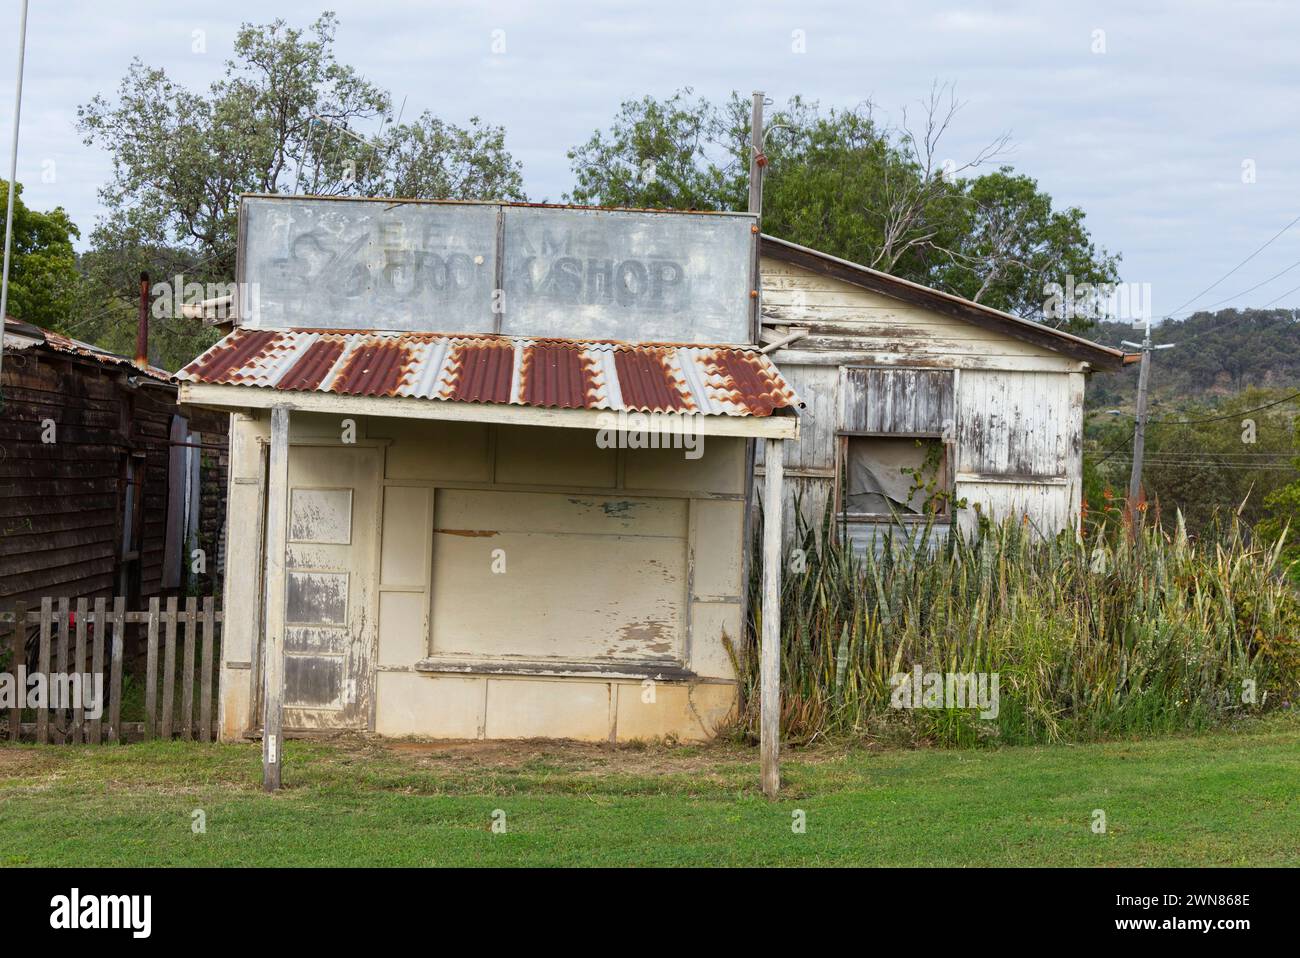 Dilapidated former retail store from the gold rush mining days of Cracow a rural town and locality in the Shire of Banana Queensland Australia. Stock Photo